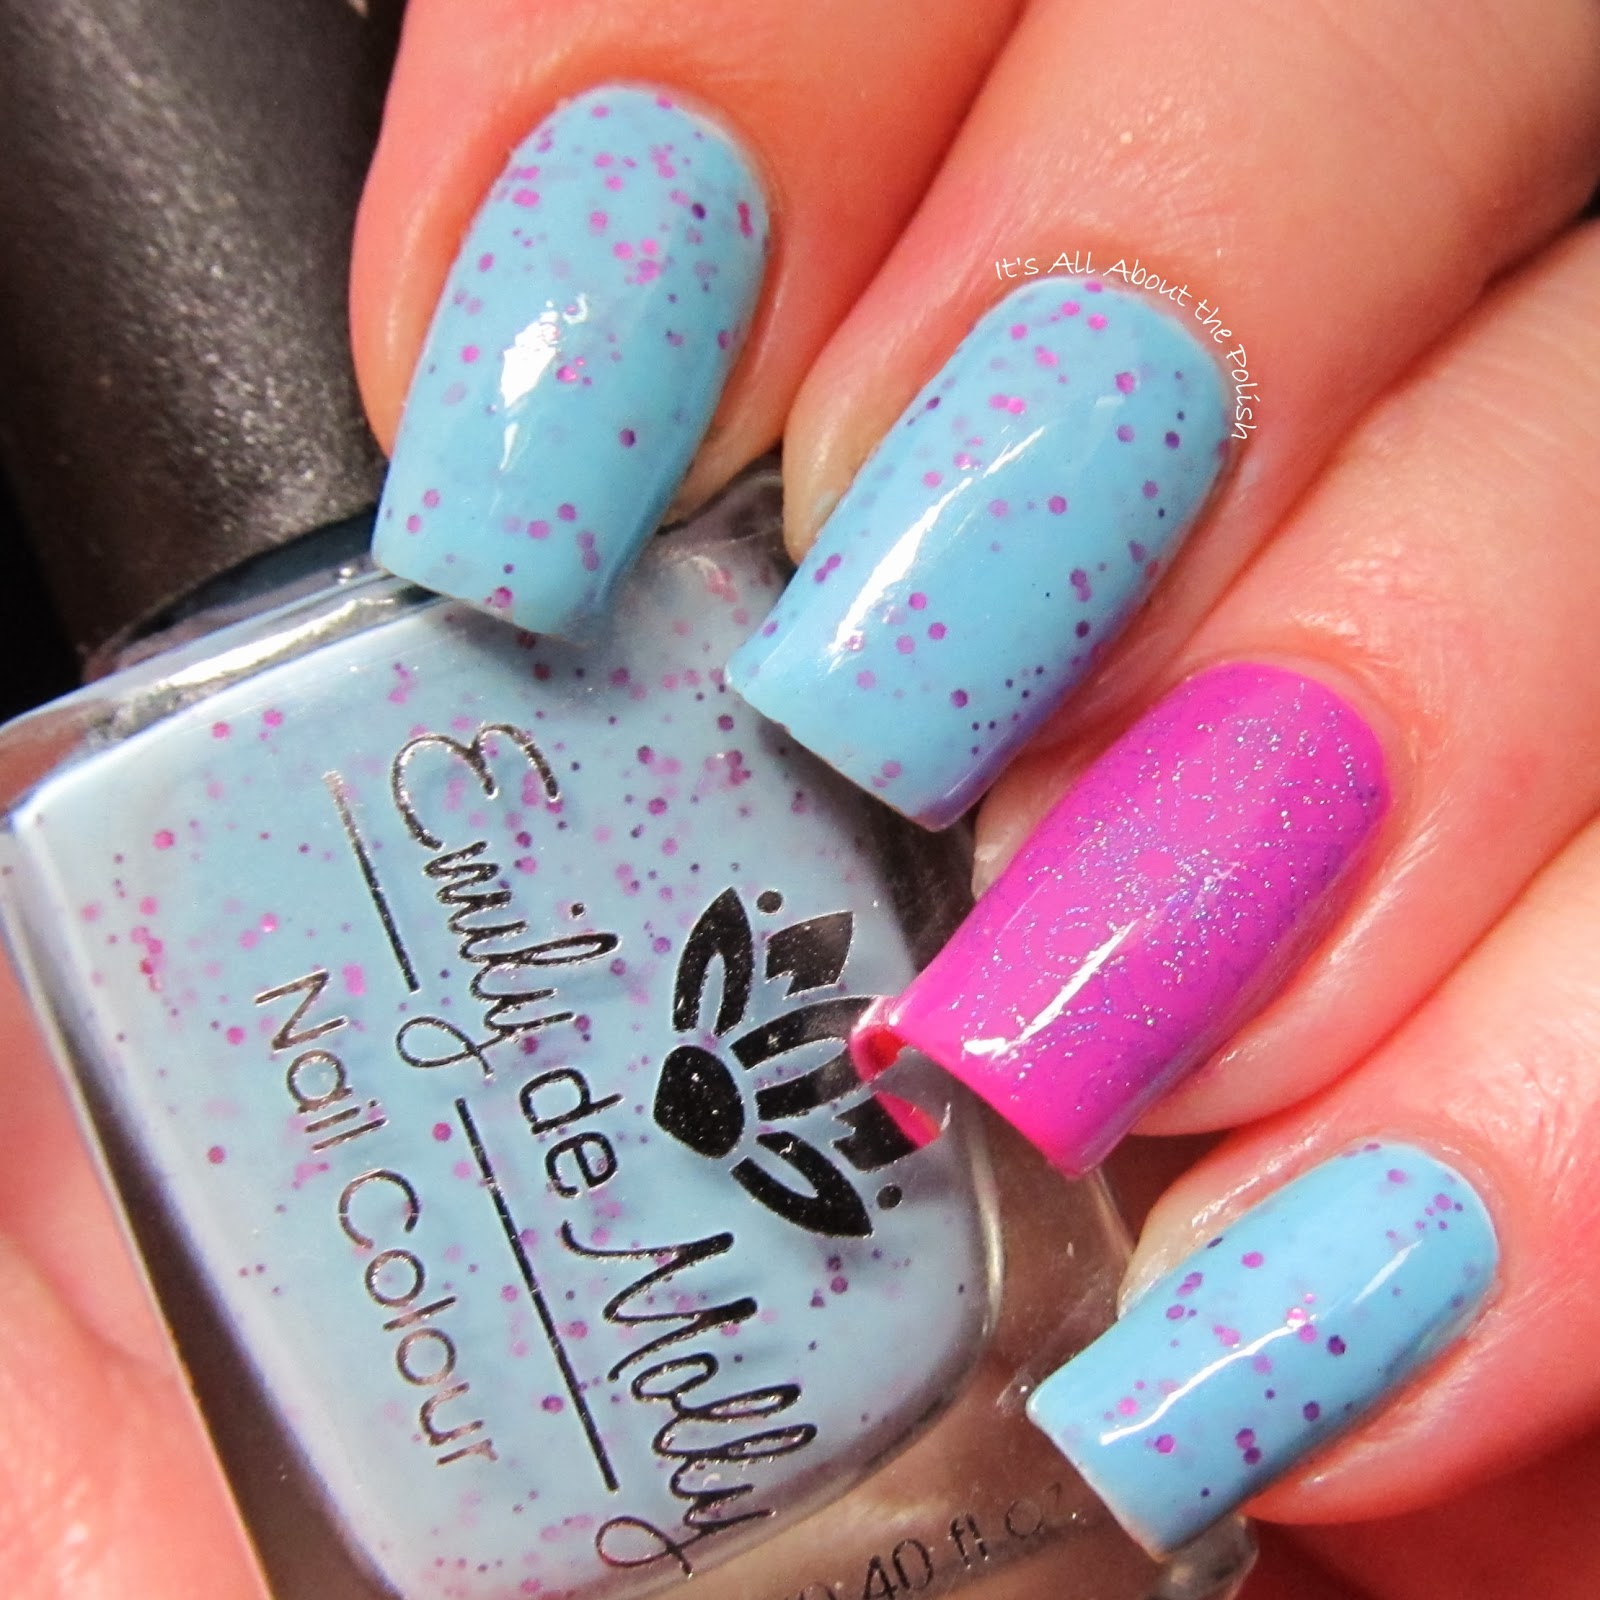 It's all about the polish: Wave of Polish - Emily de Molly Candy Coated